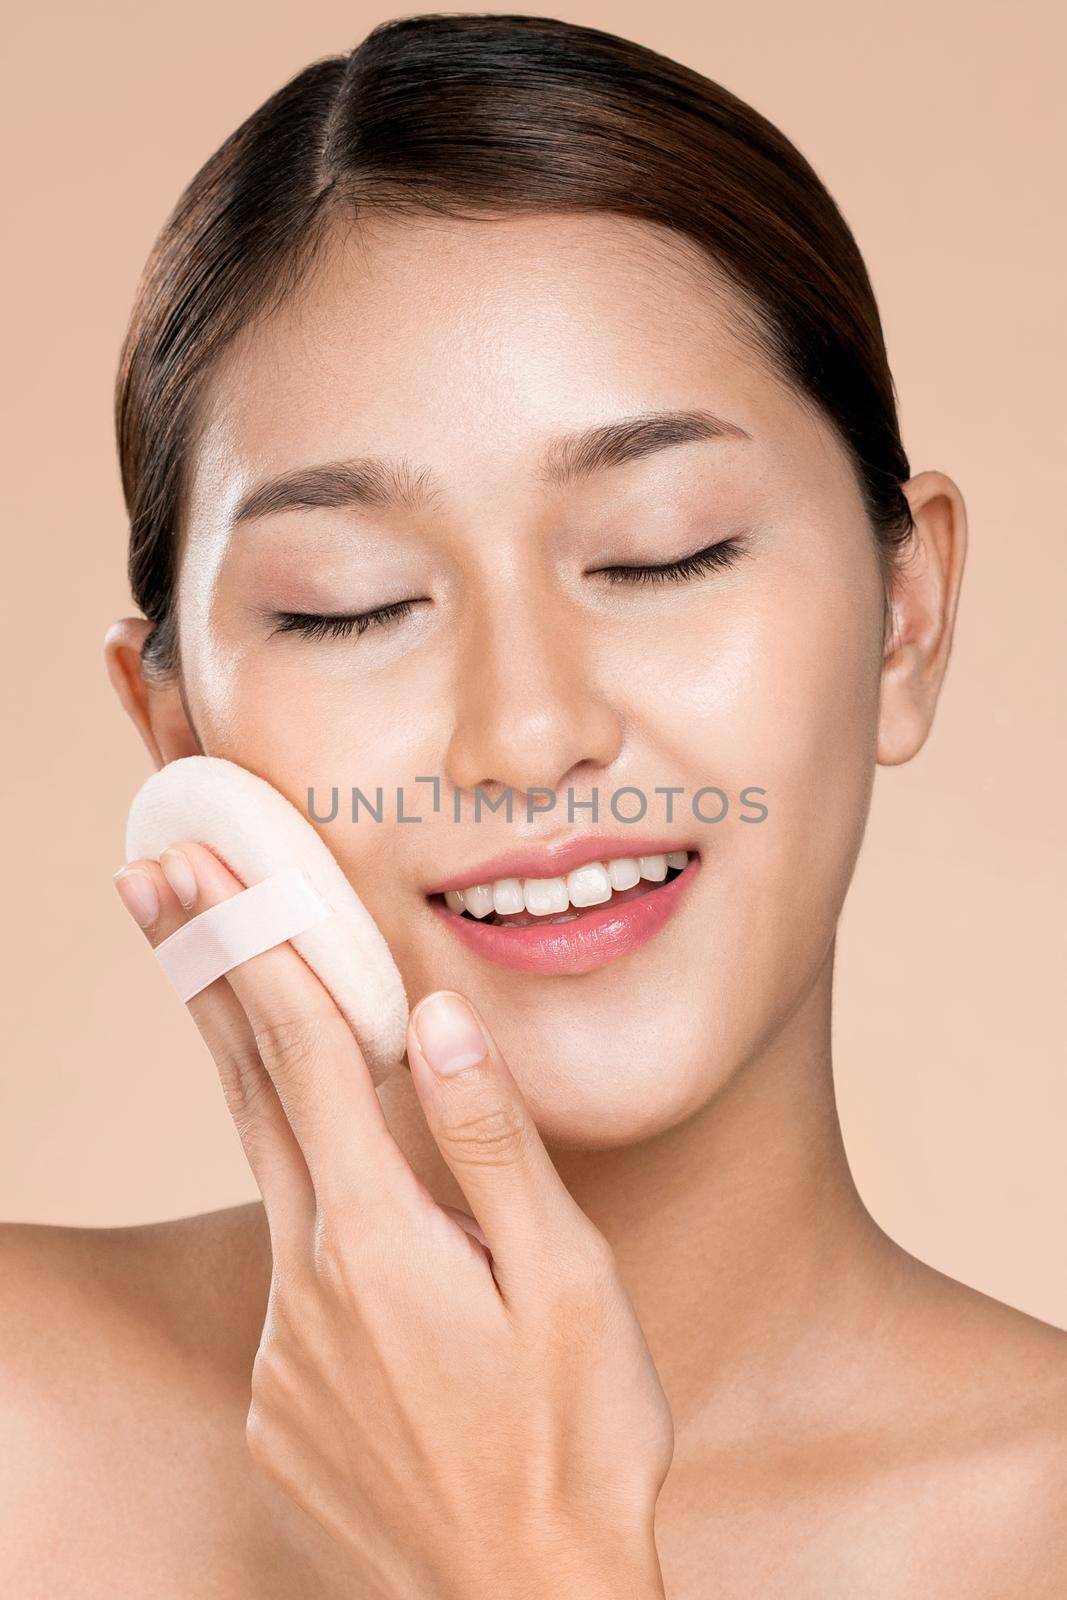 Closeup ardent woman applying her cheek with dry powder and looking at camera. Portrait of younger with perfect makeup and healthy skin concept.